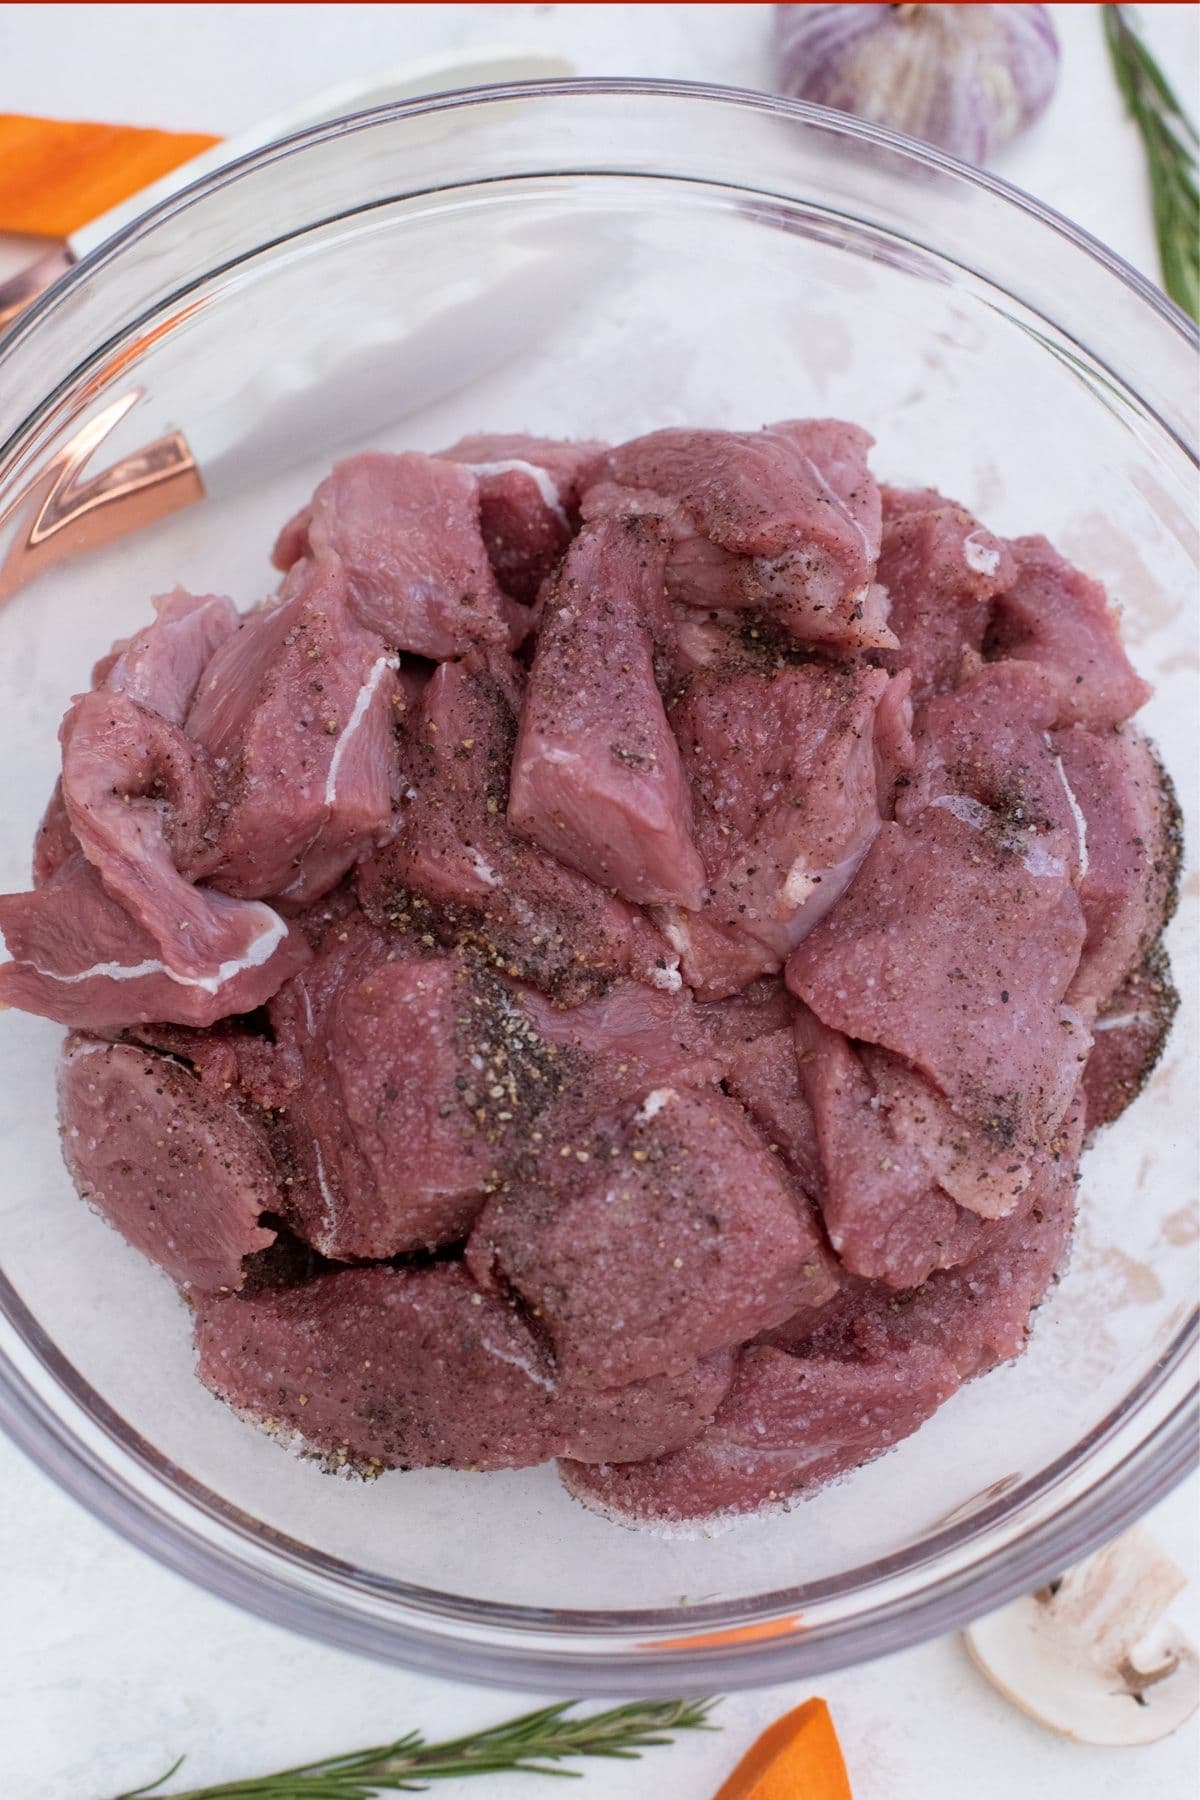 Chunks of beef in large glass bowl